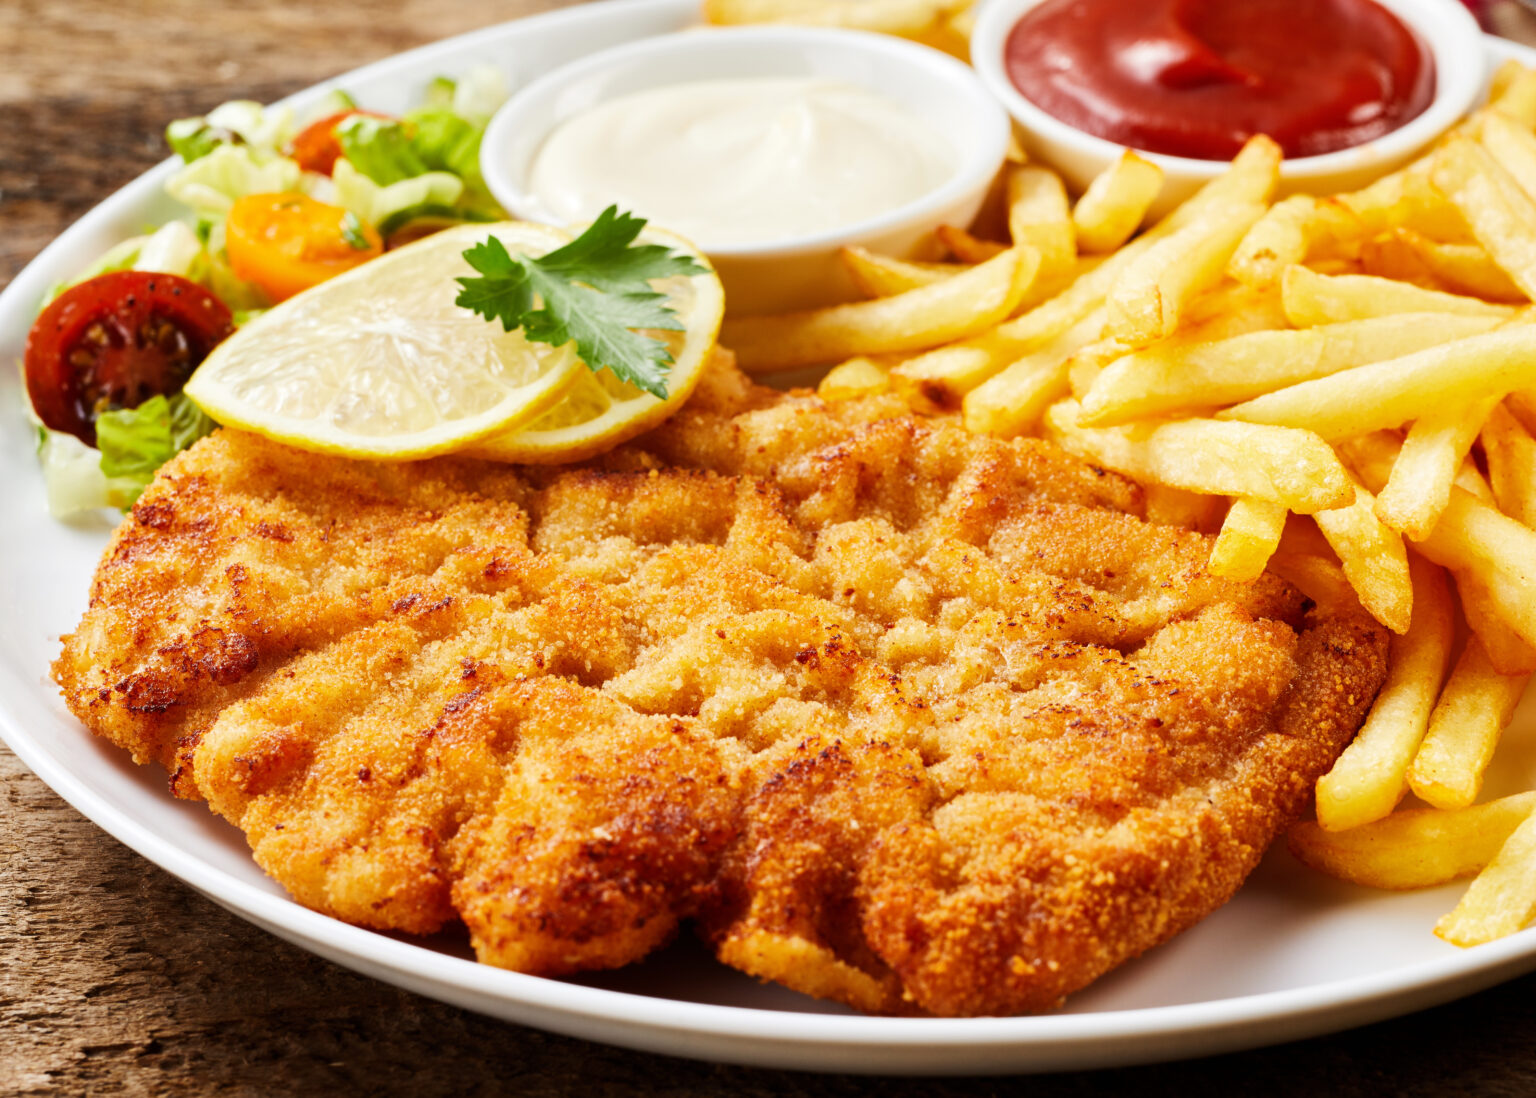 Schnitzel and French fries dish served with ketchup and mayonnaise, lemon and vegetables, close-up on white plate